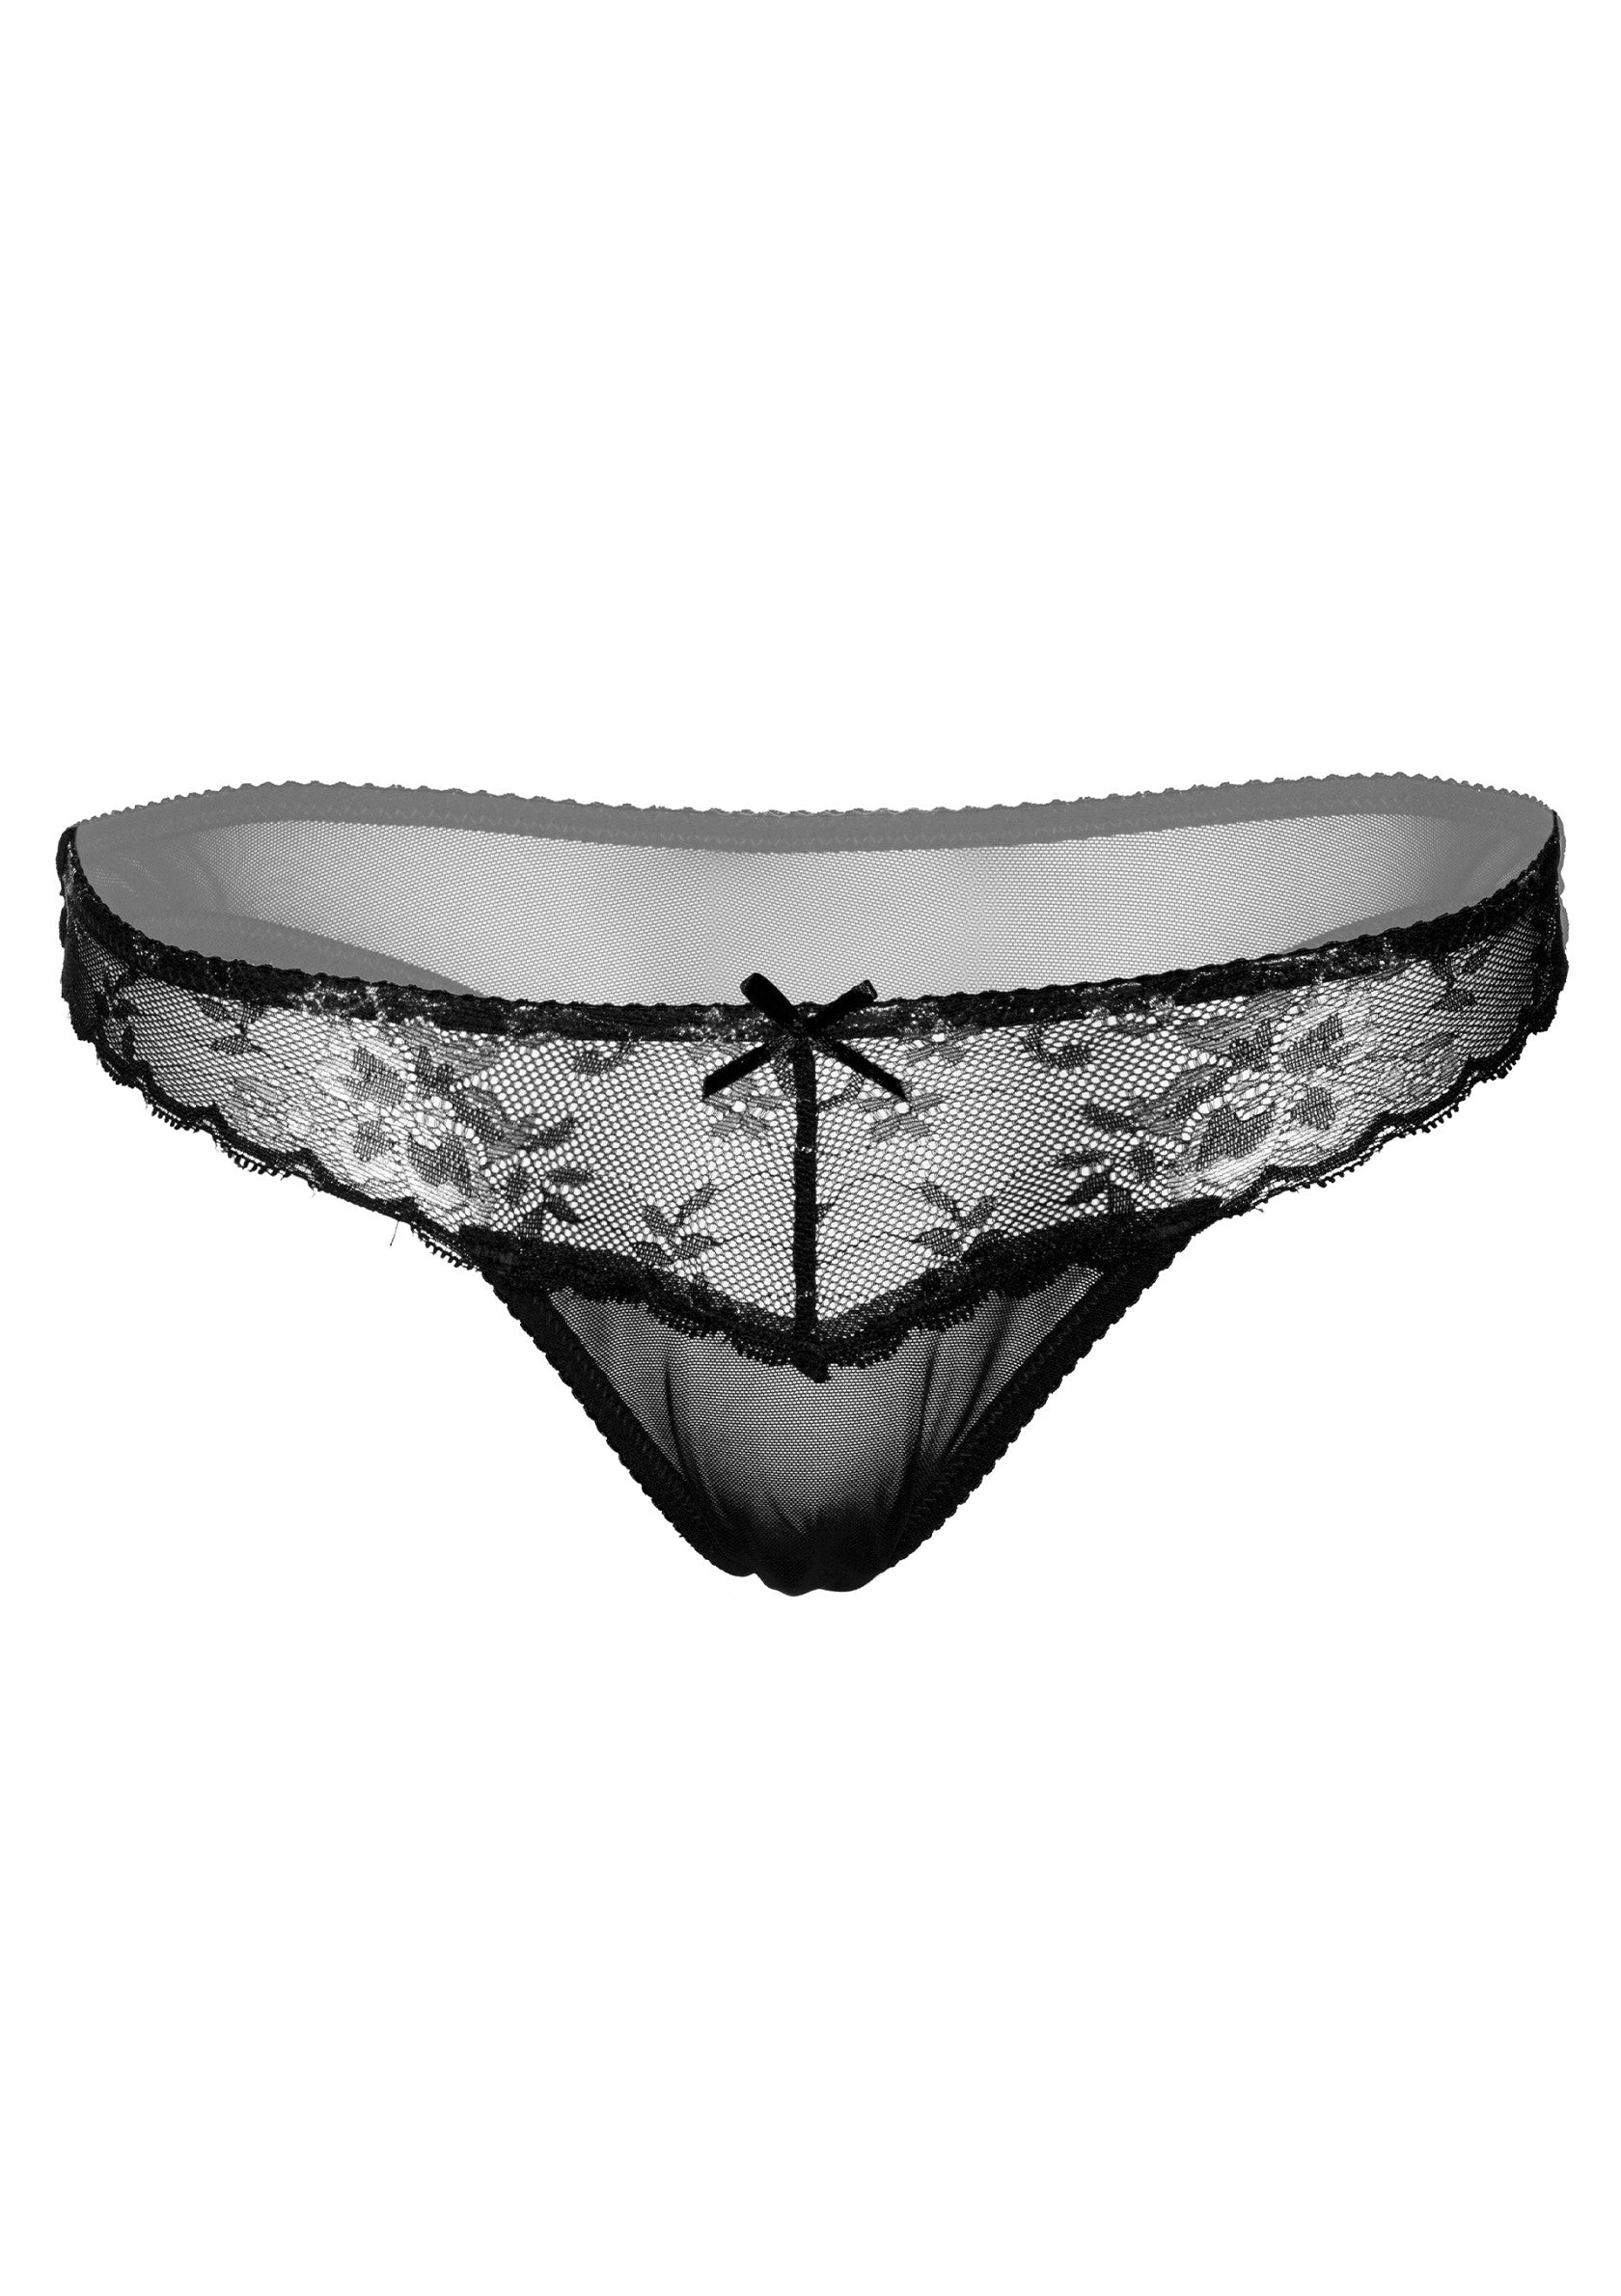 Daring Intimates Mix & Match Very sexy floral lace string BLACK S/M - 1